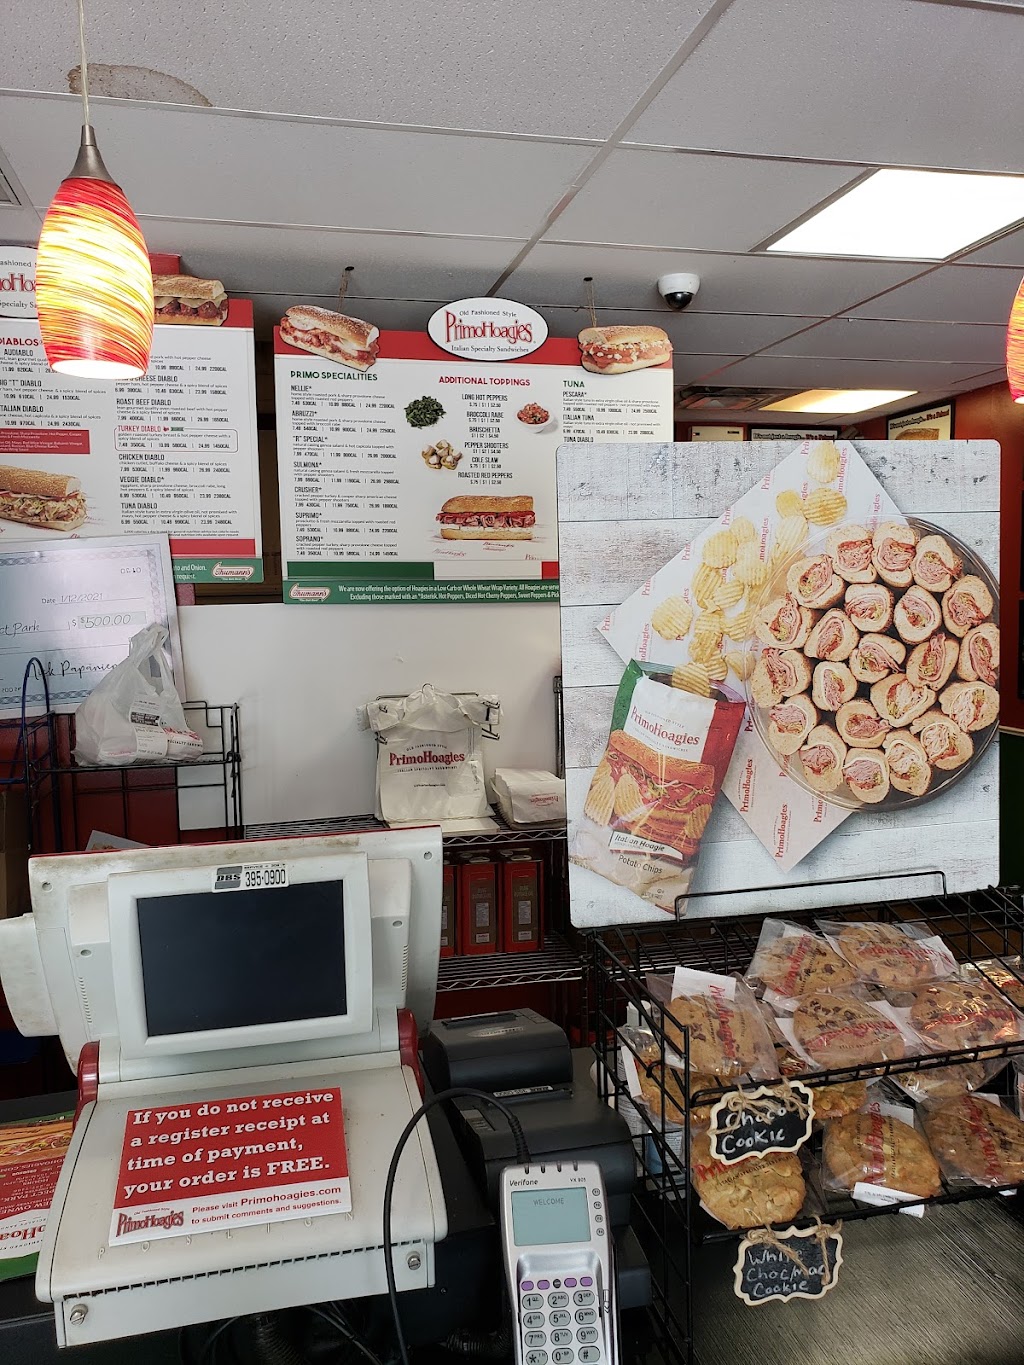 PrimoHoagies | 904 Chester Pike, Prospect Park, PA 19076 | Phone: (610) 237-7466